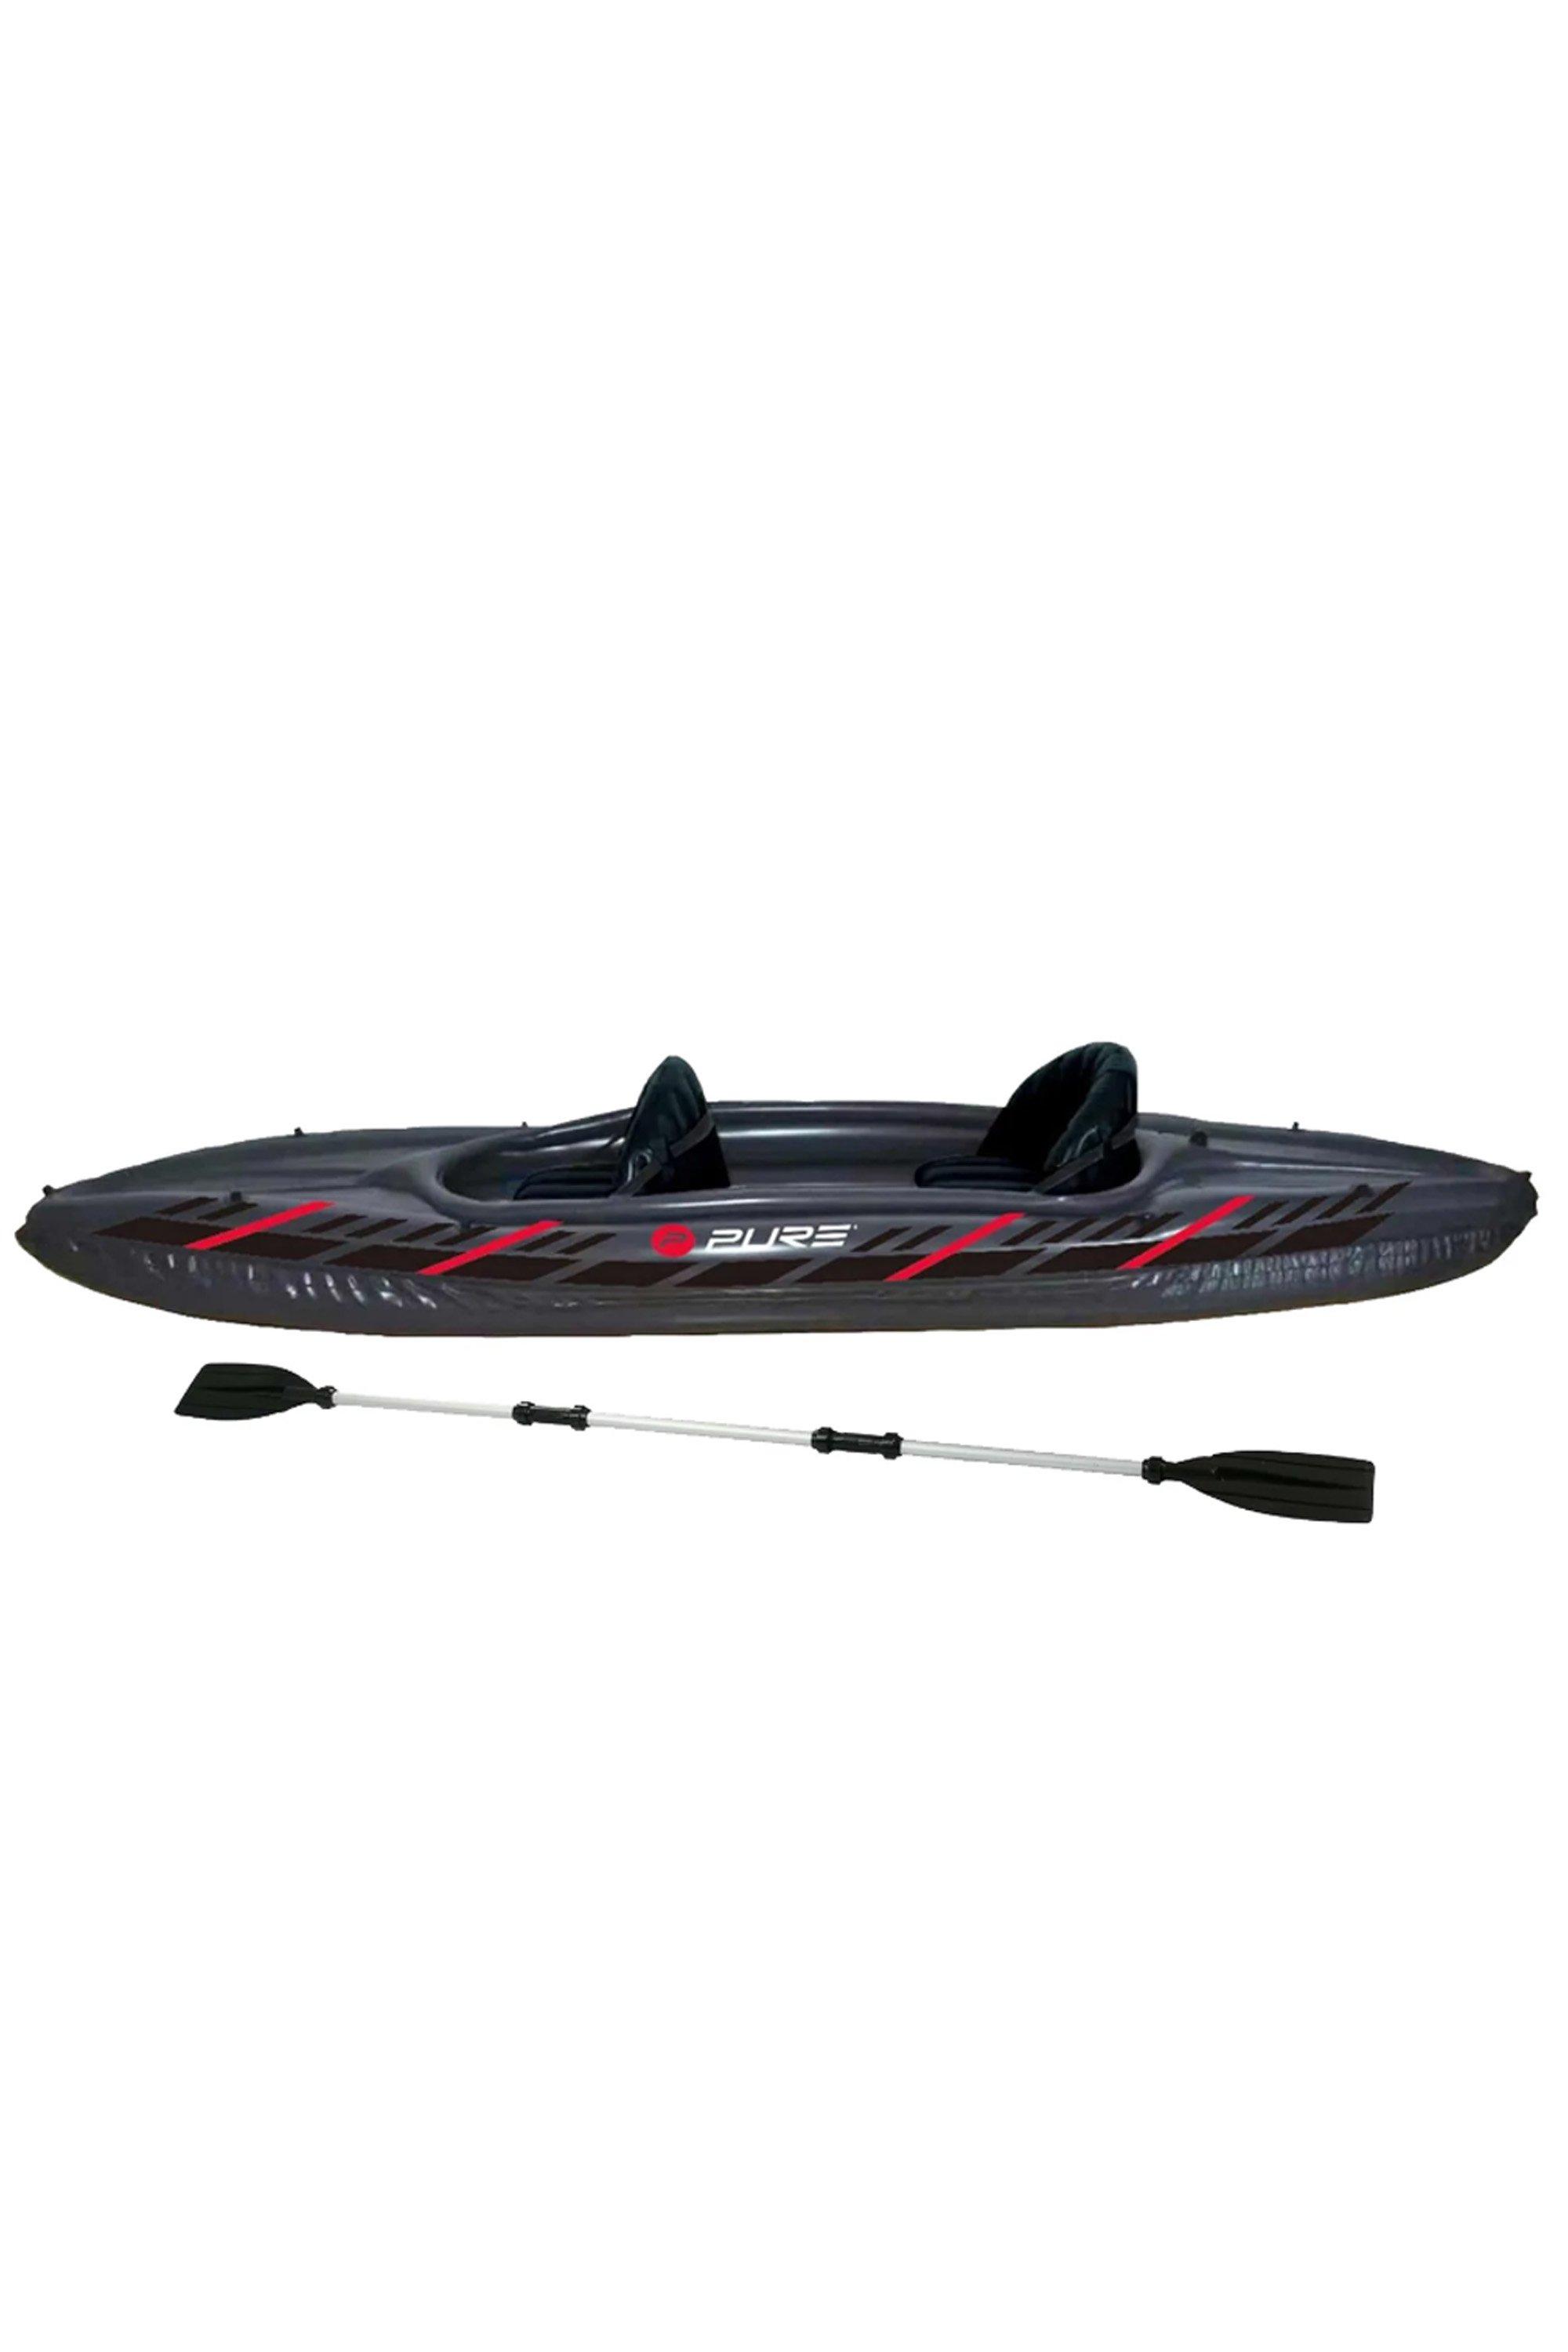 Xpro 2 Person Inflatable Kayak 3.0